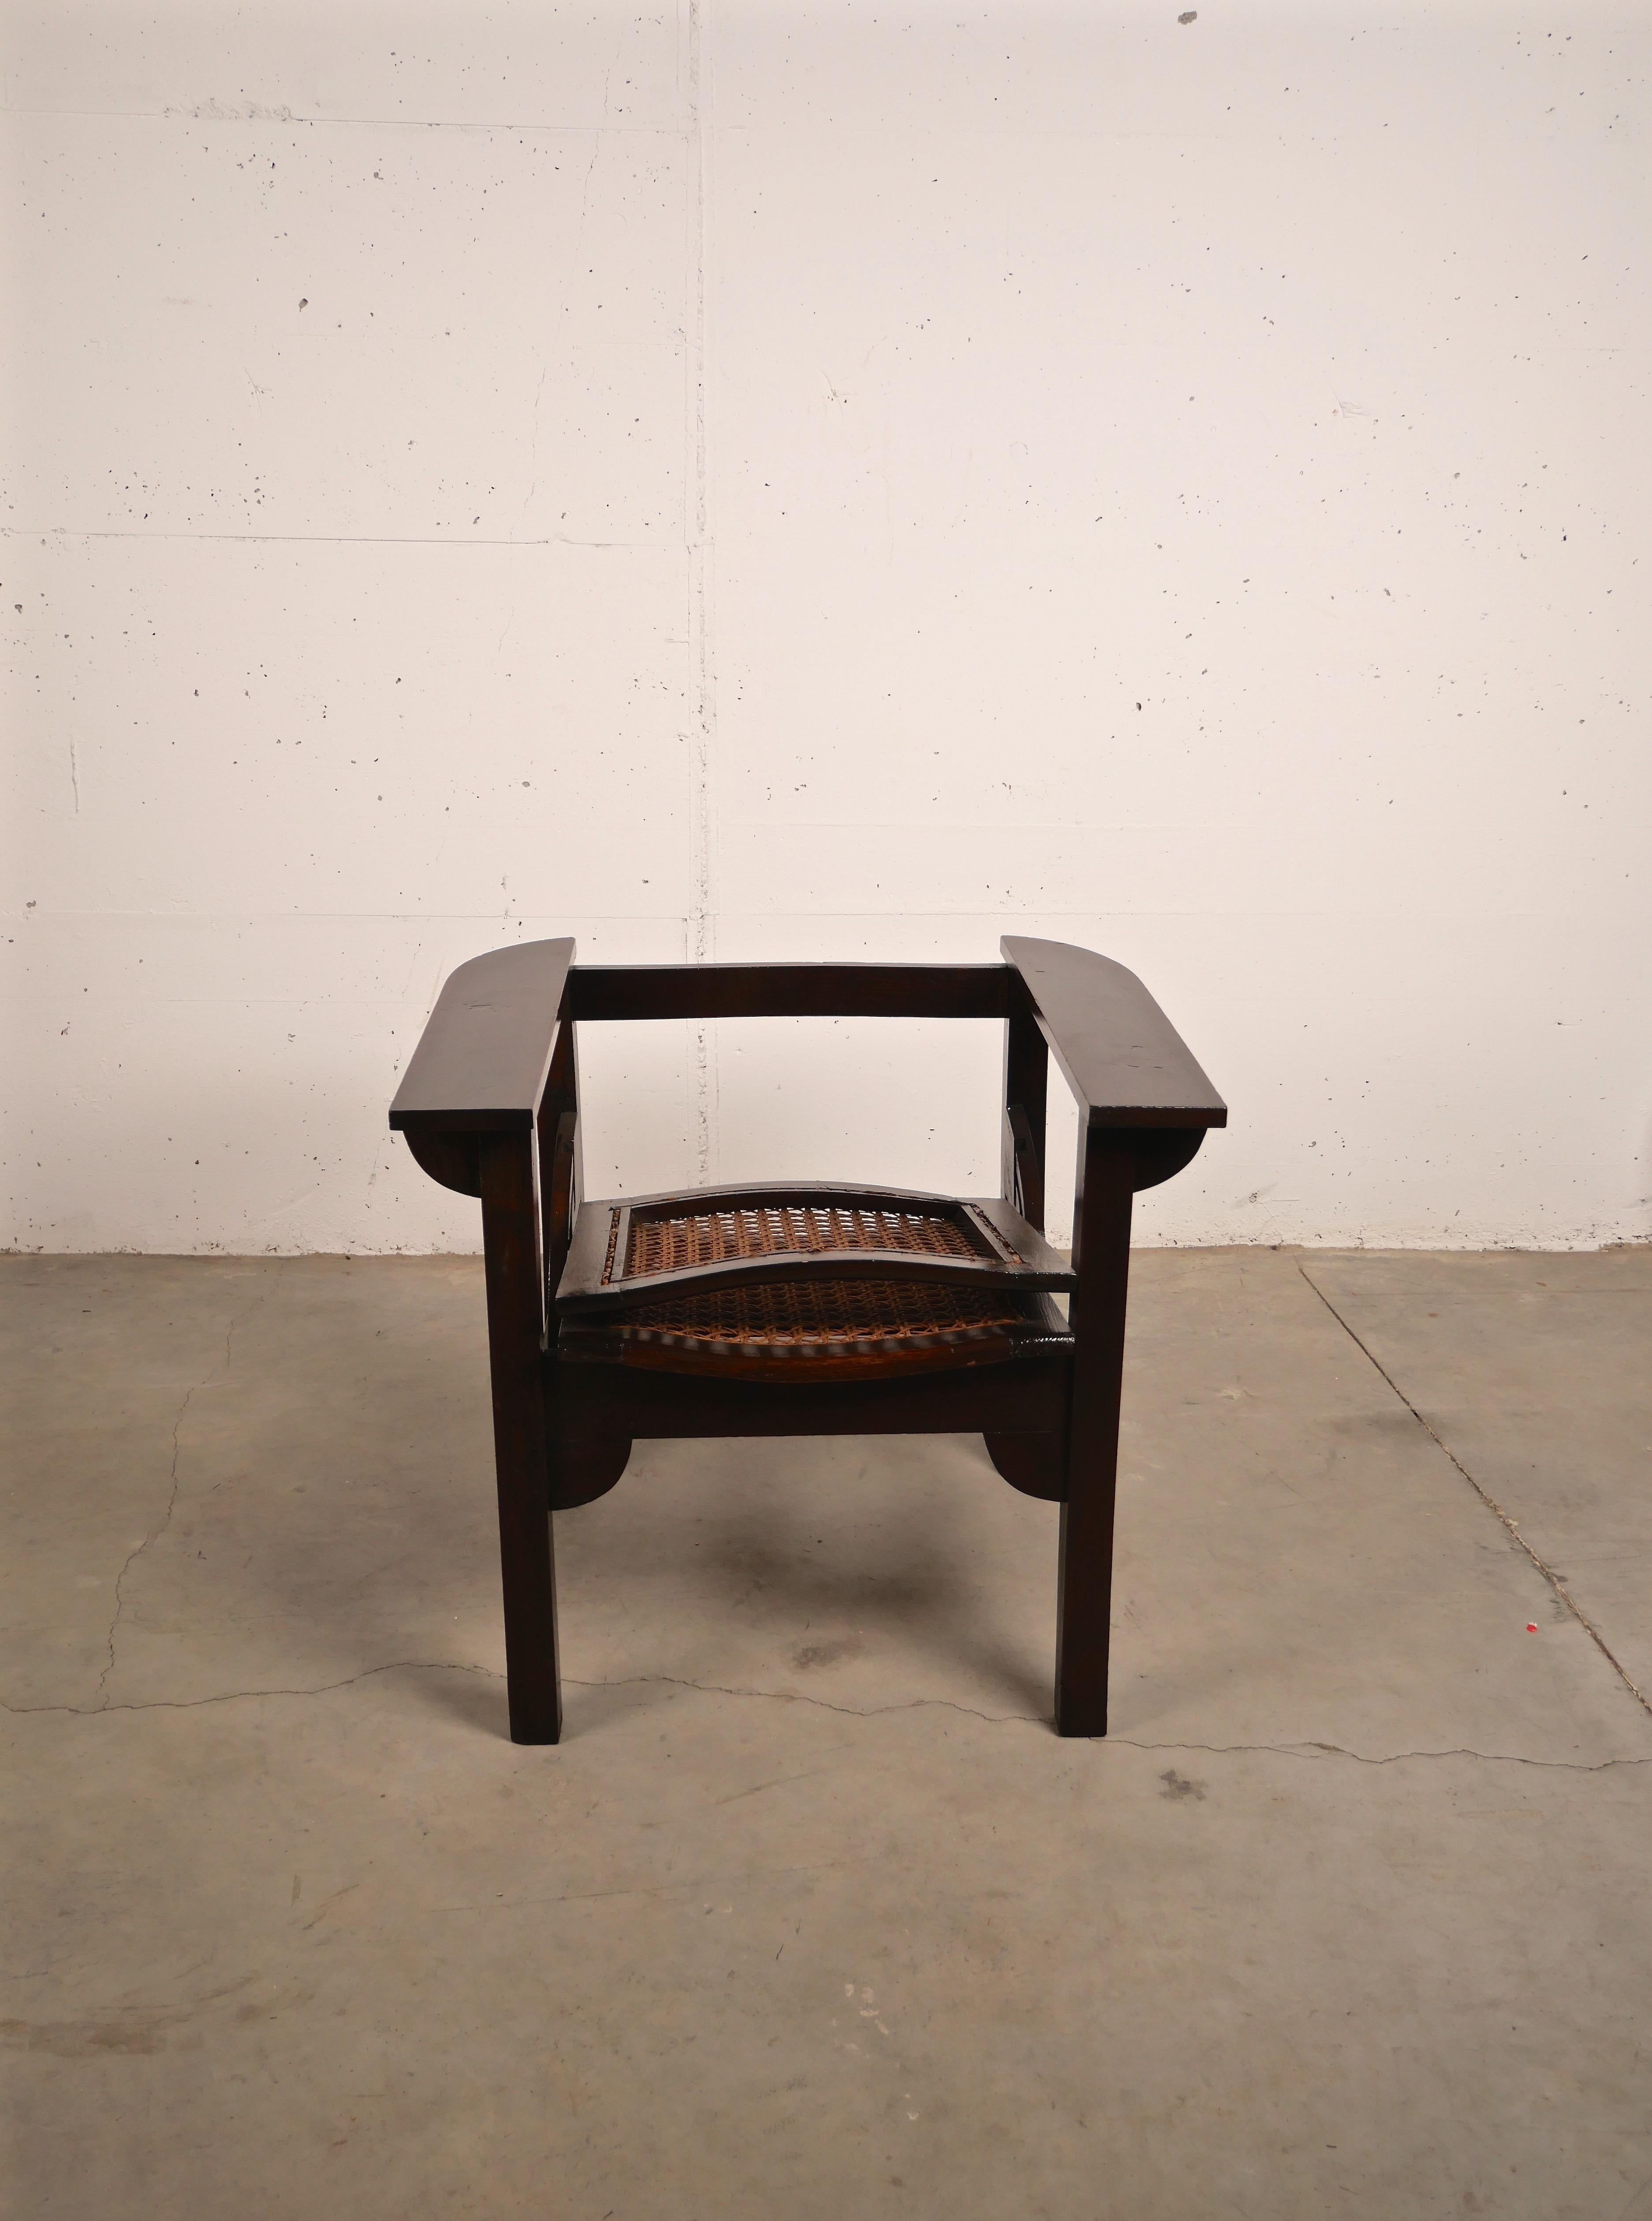 Hendaye Armchair in Walnut and Cane by Pierre Dariel, France, 1930 For Sale 2